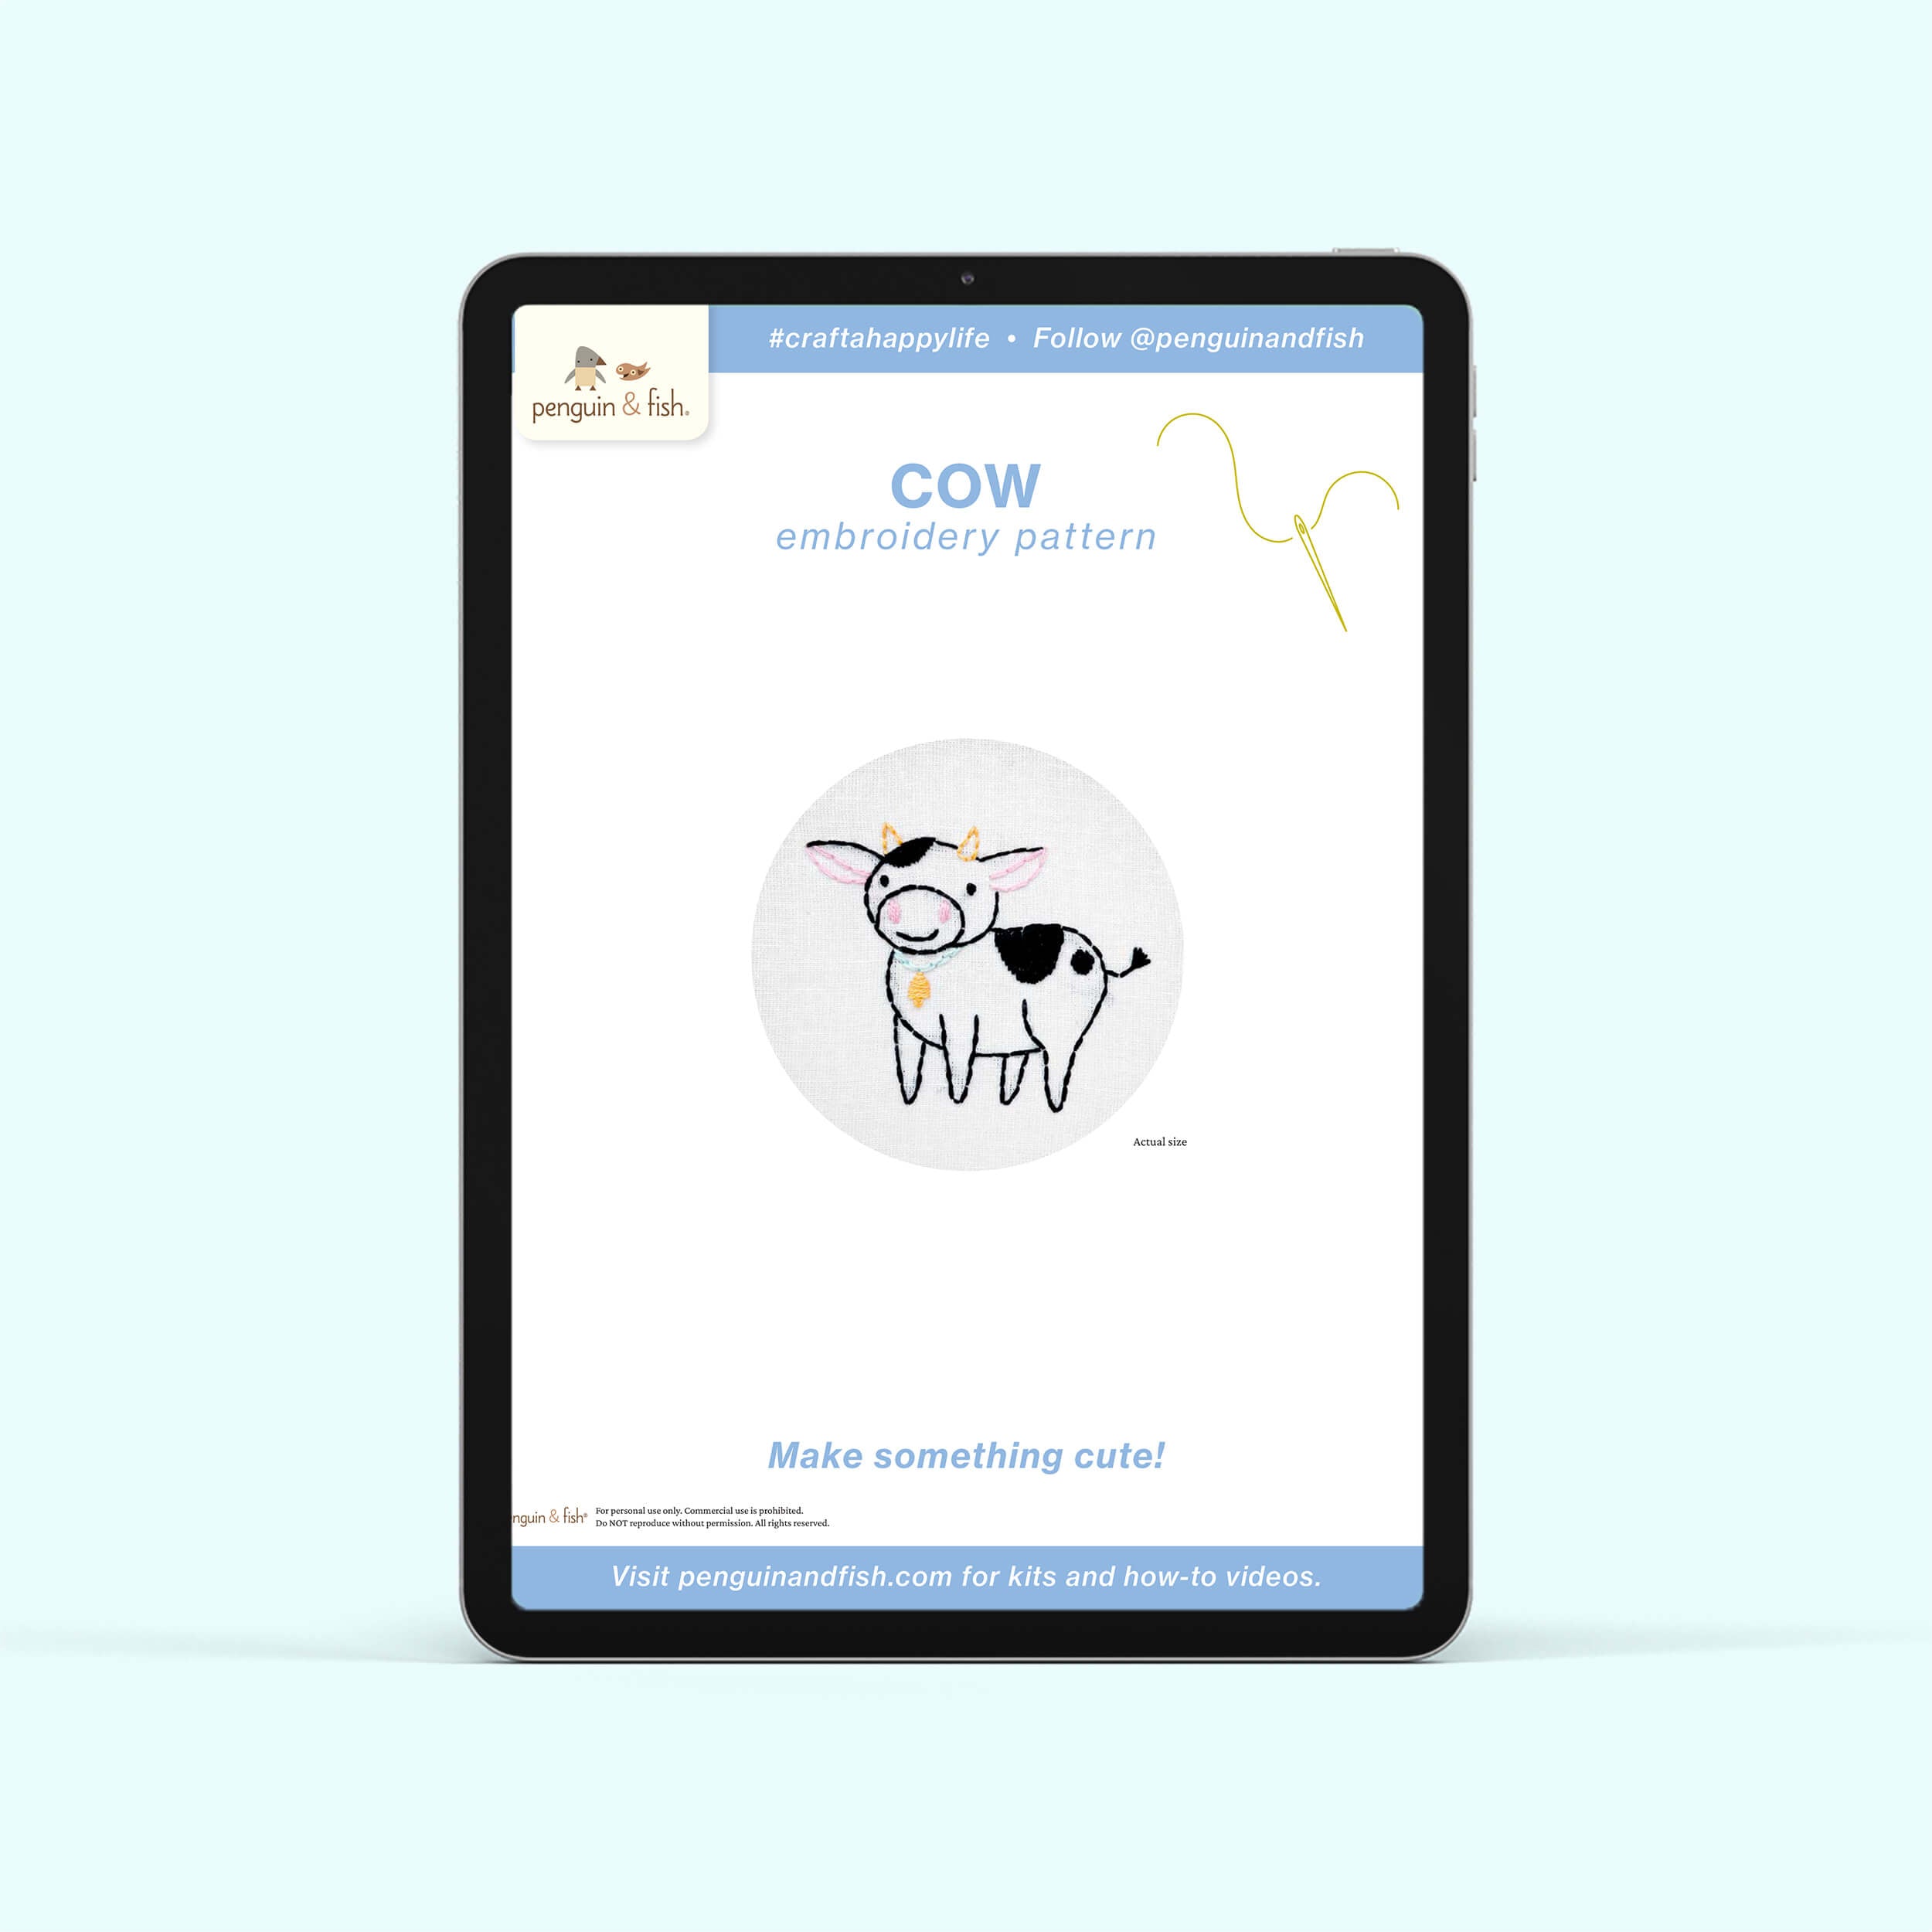 Cow PDF embroidery patttern shown on a tablet